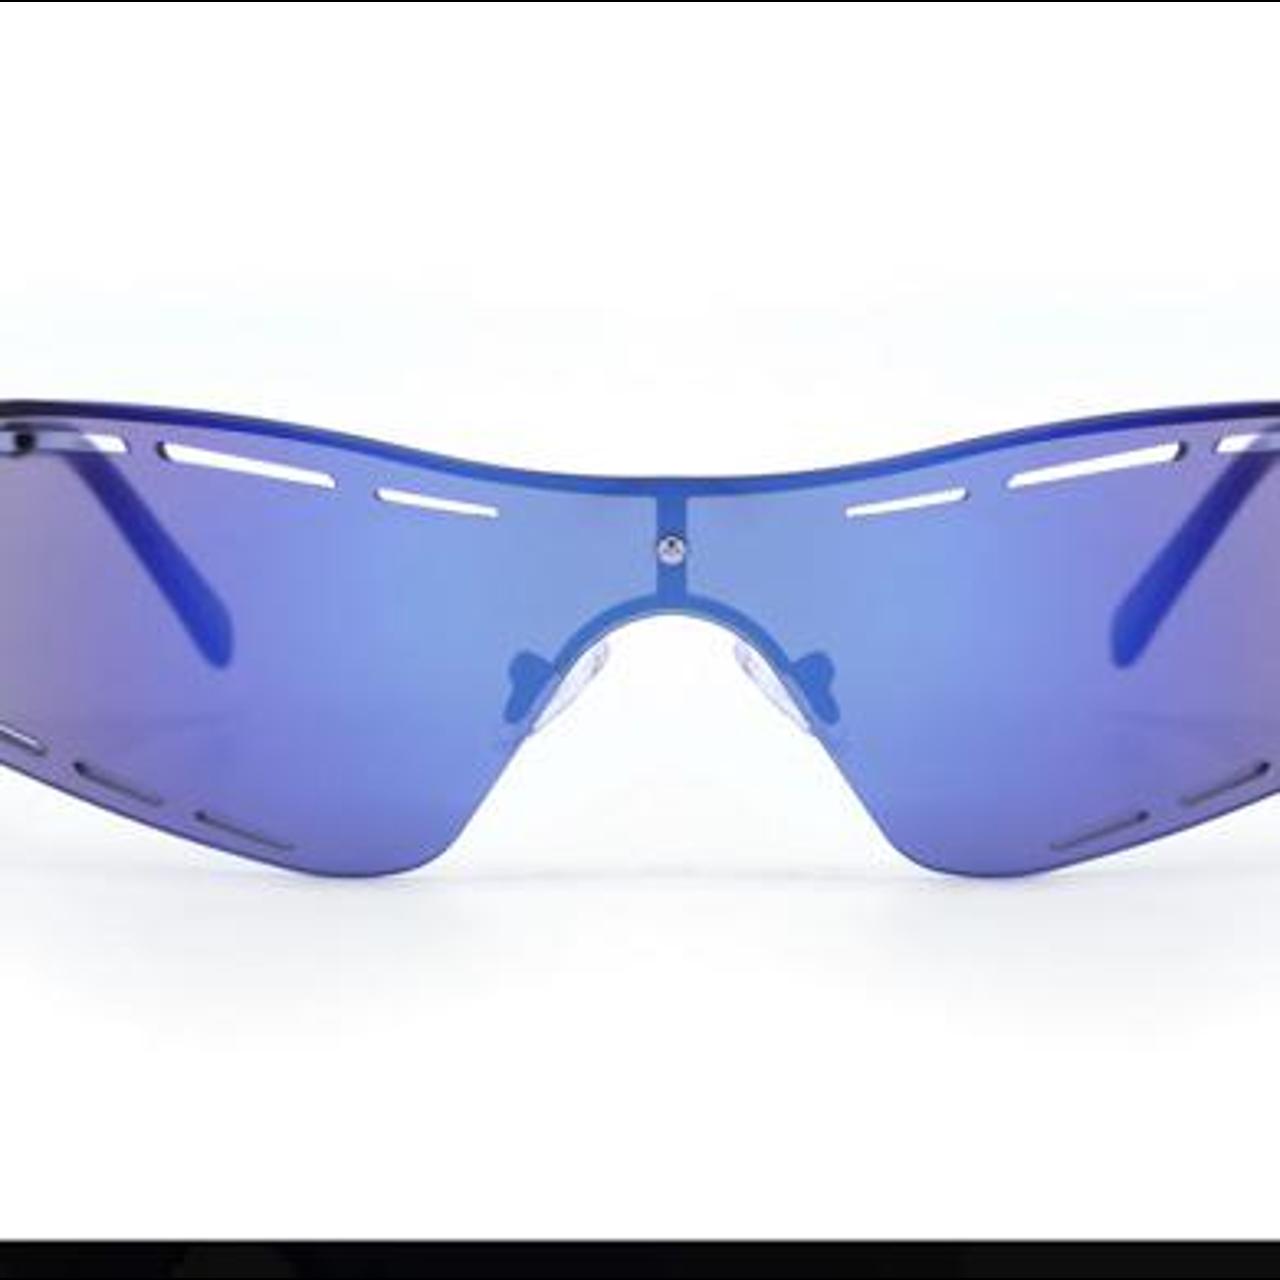 & Other Stories Men's Blue and Black Sunglasses (3)